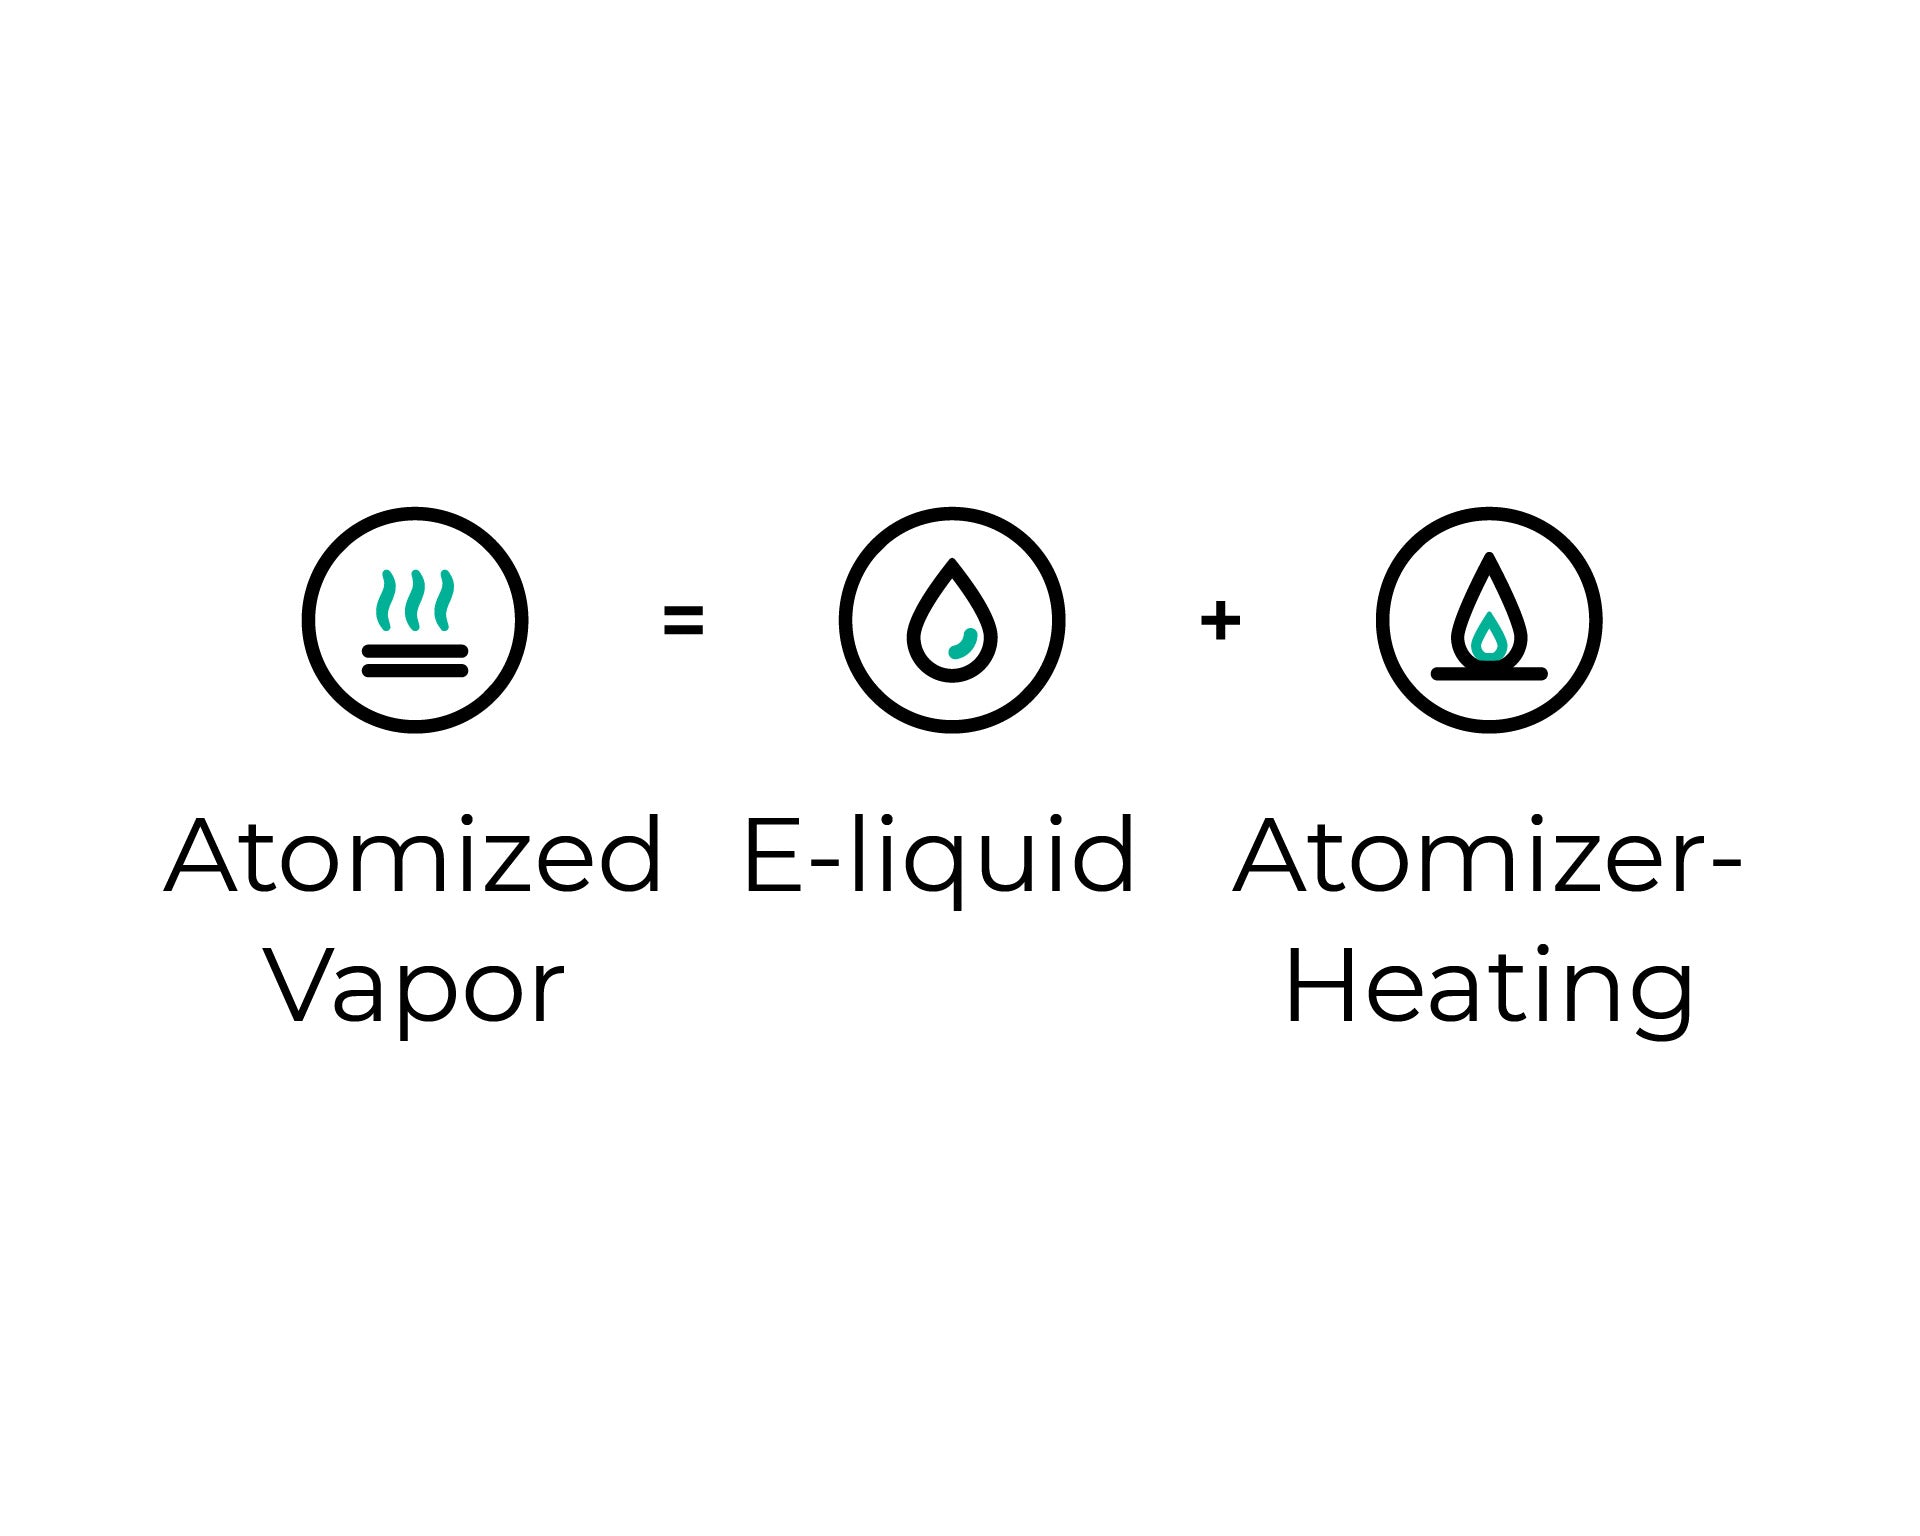 A vape works in the similar way to a humidifier, and its working principles are quite easy to understand.